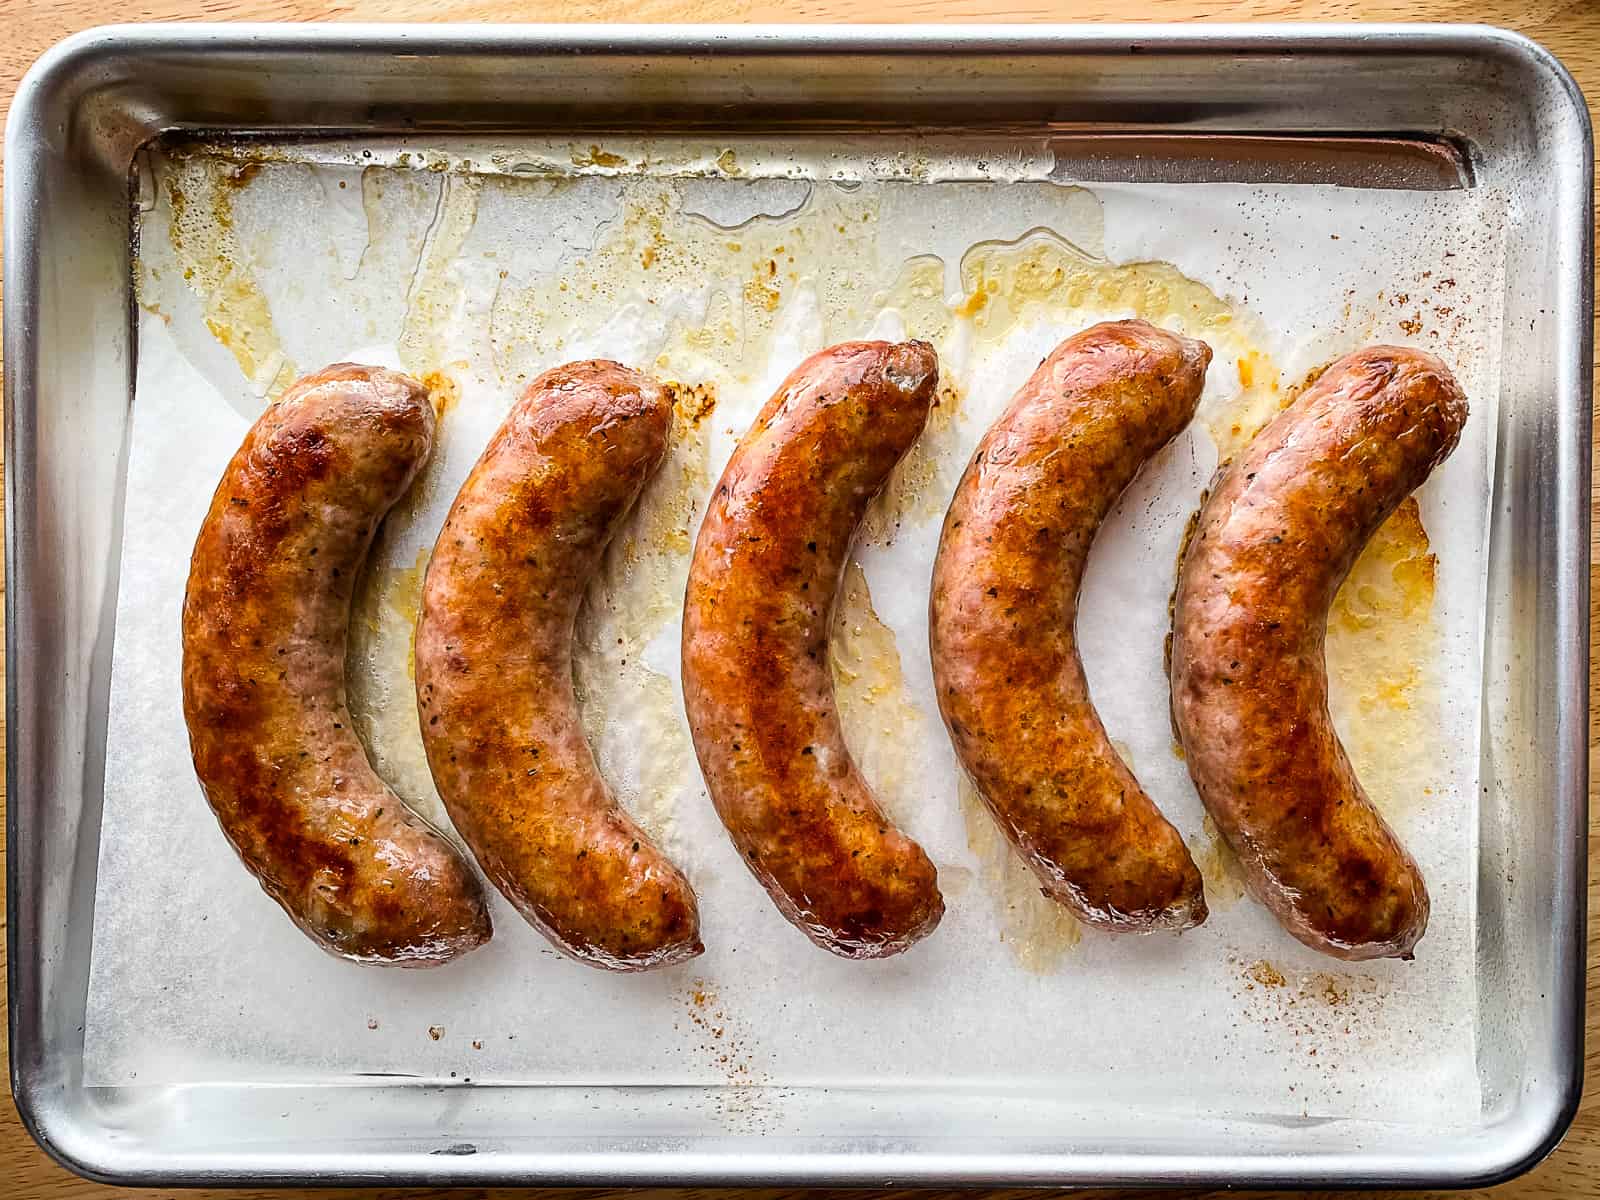 How Long to Cook Sausage in Oven